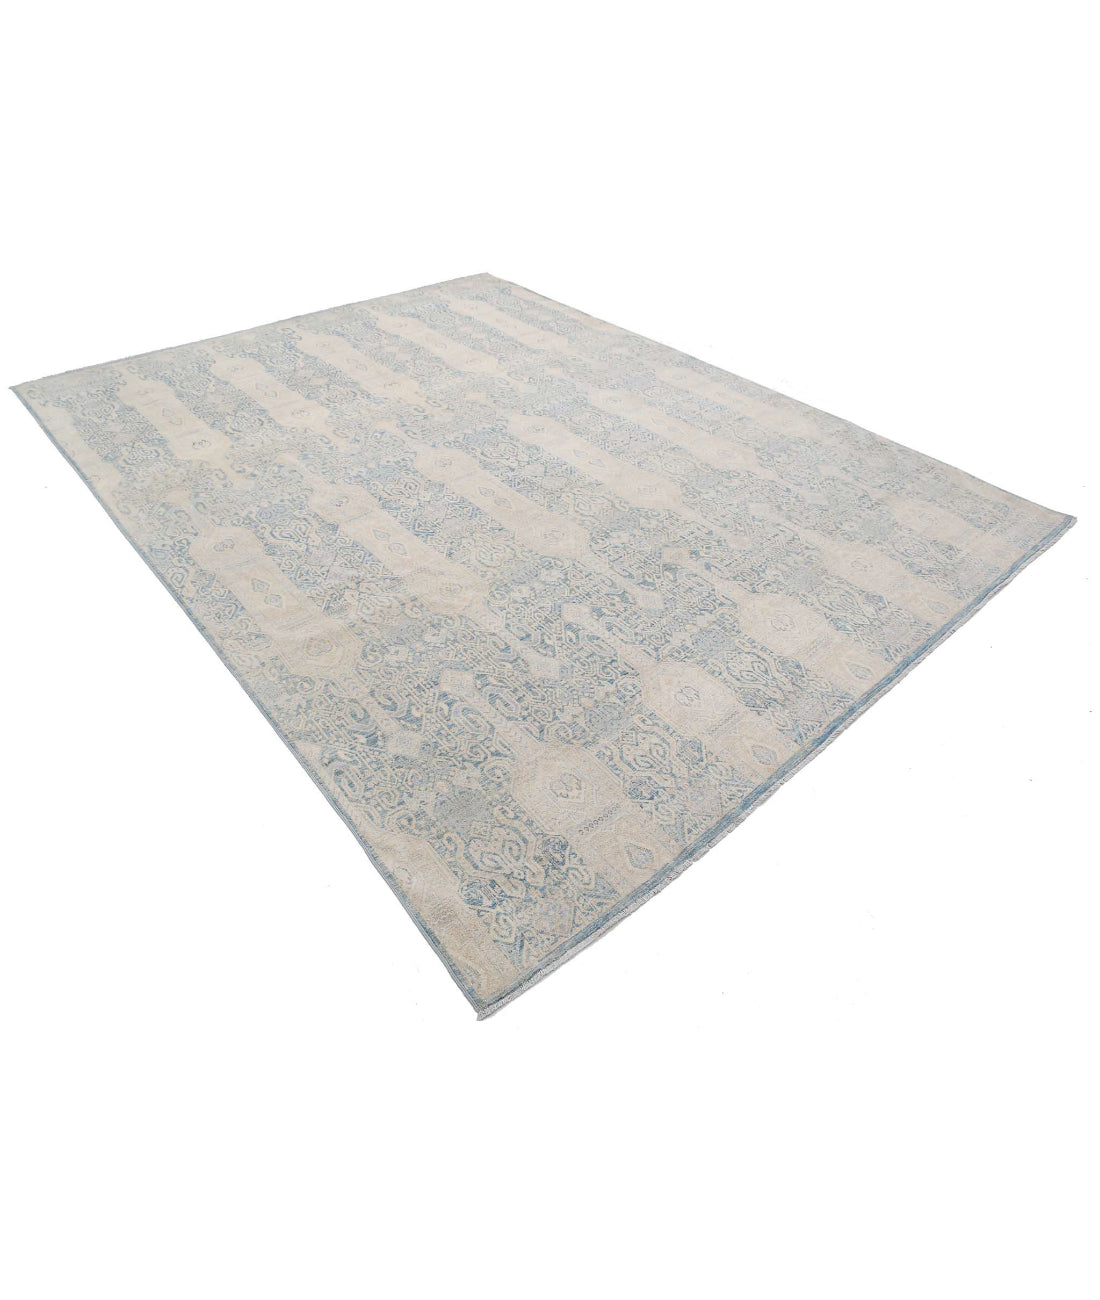 Hand Knotted Fine Artemix Wool Rug - 7'11'' x 10'4'' 7'11'' x 10'4'' (238 X 310) / Blue / Ivory